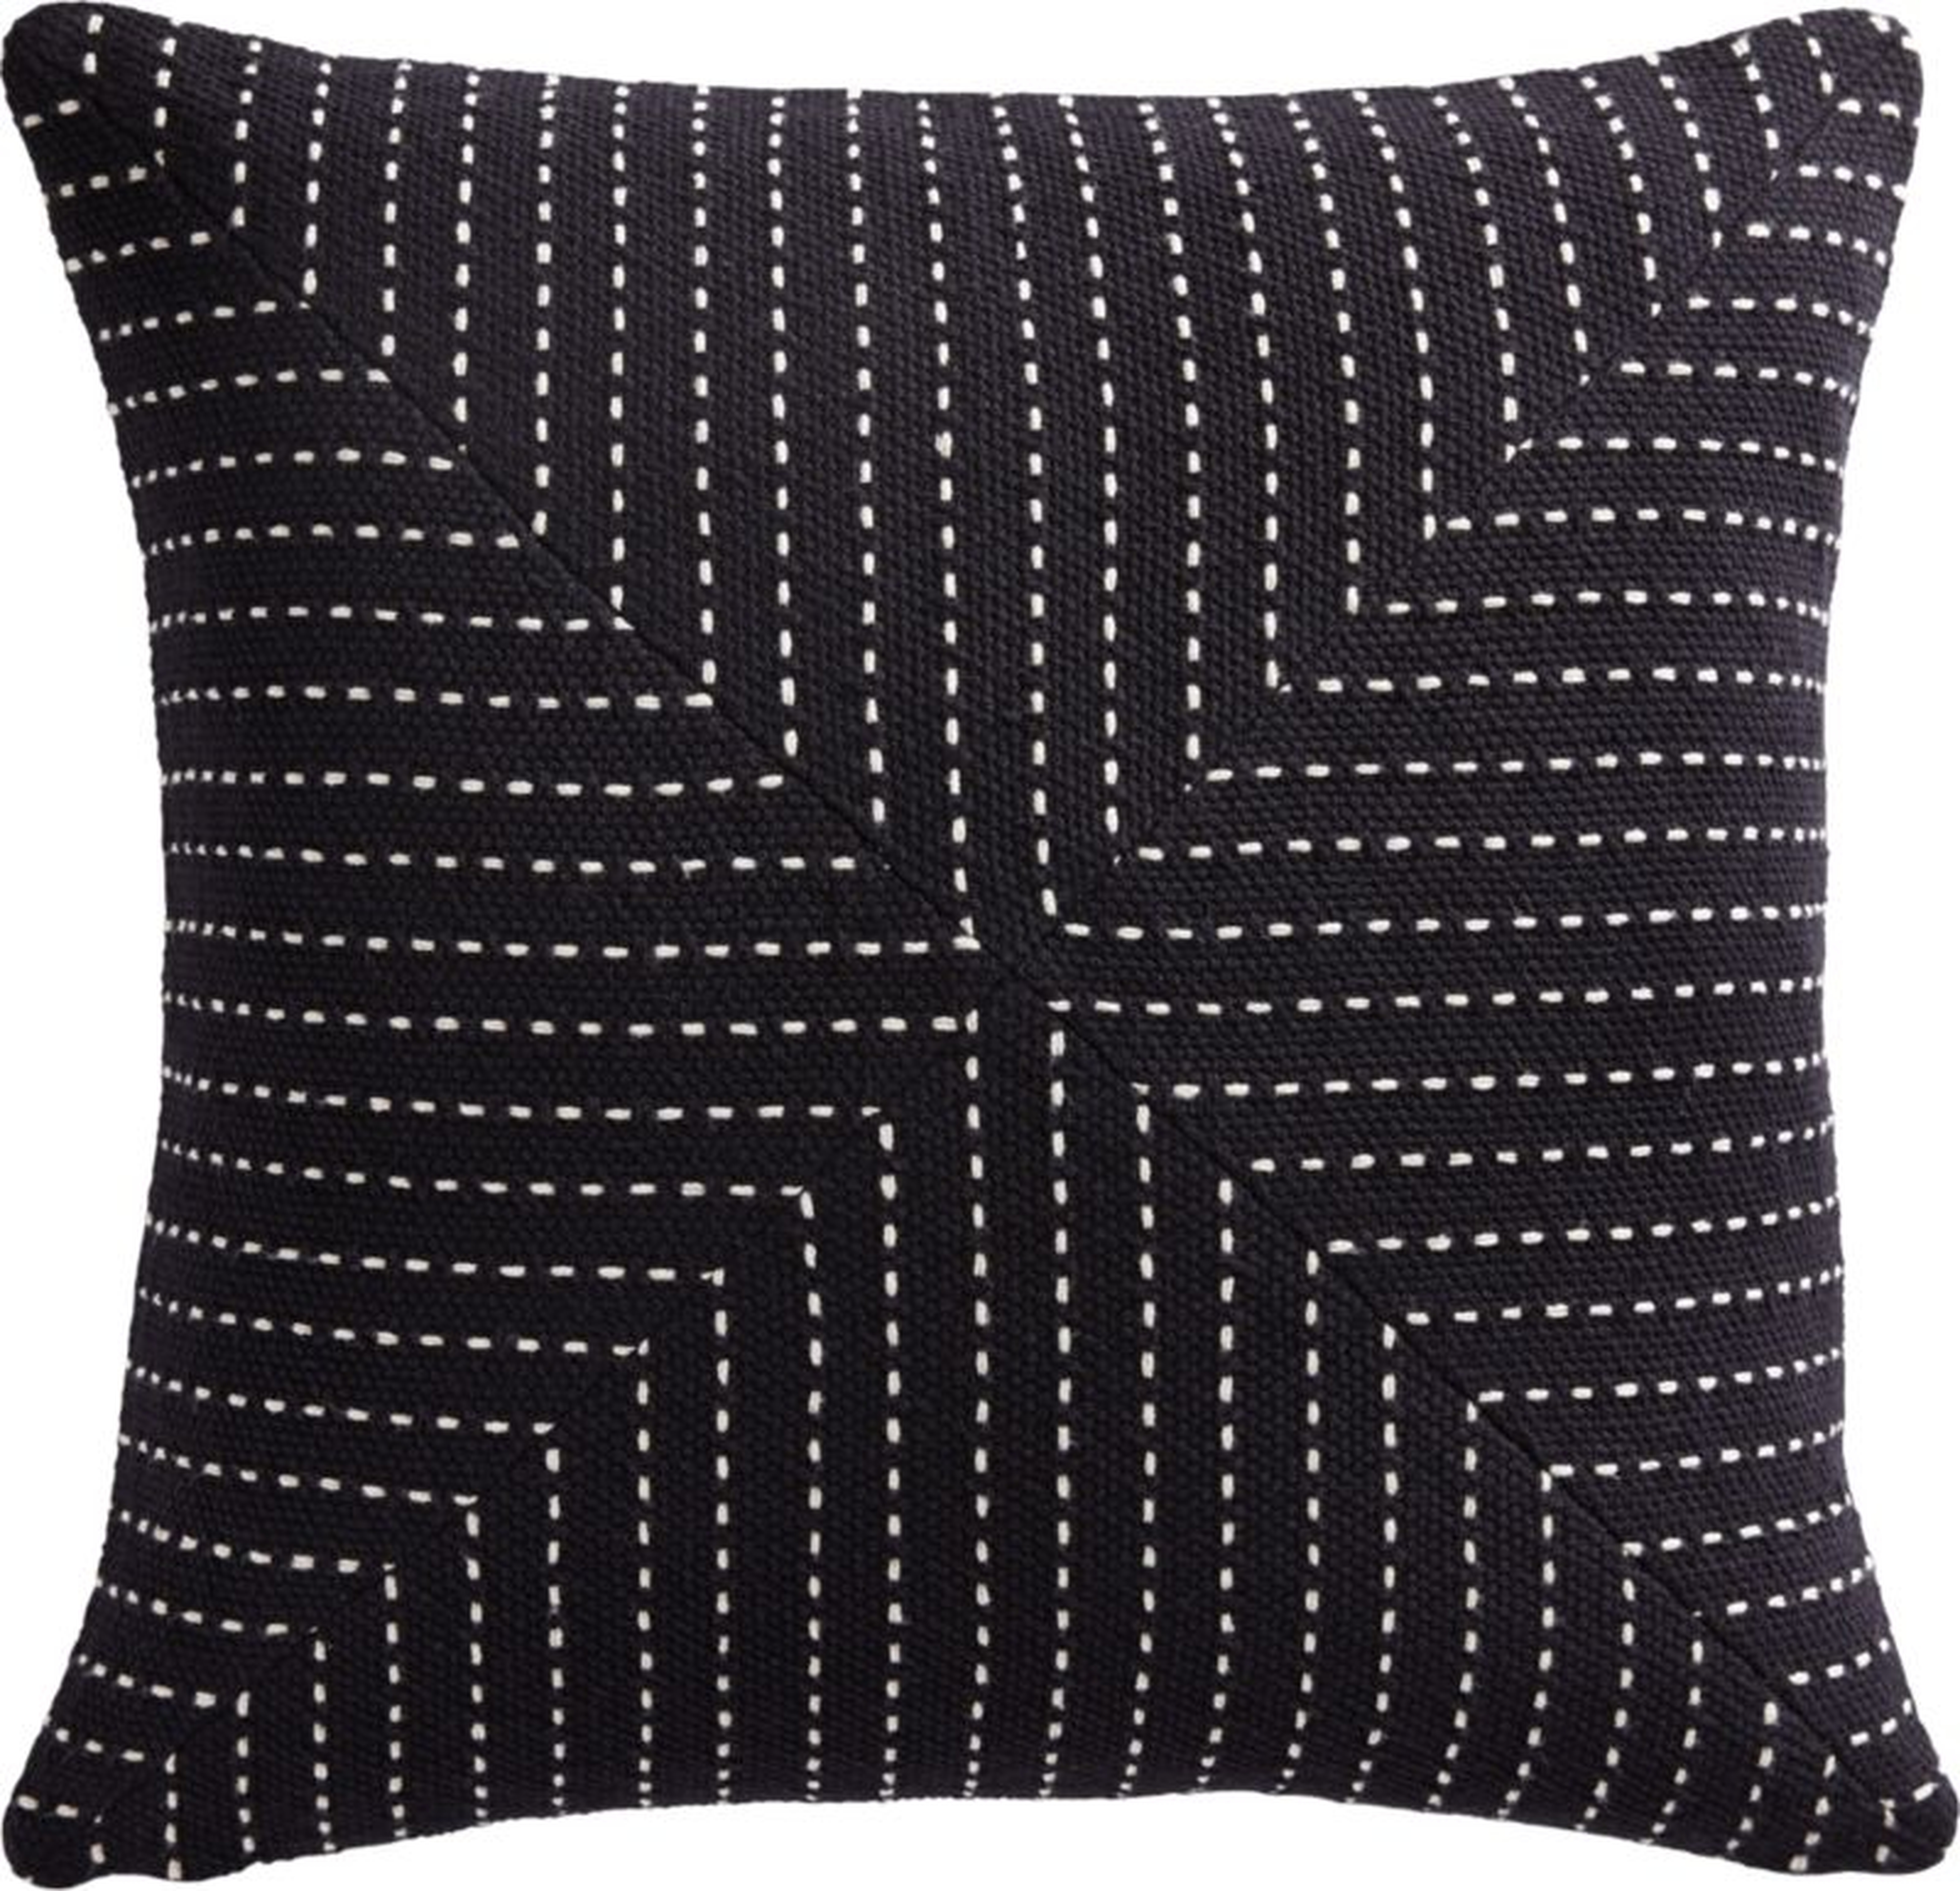 Clique Black Pillow with Feather-Down Insert, 20" x 20" - CB2